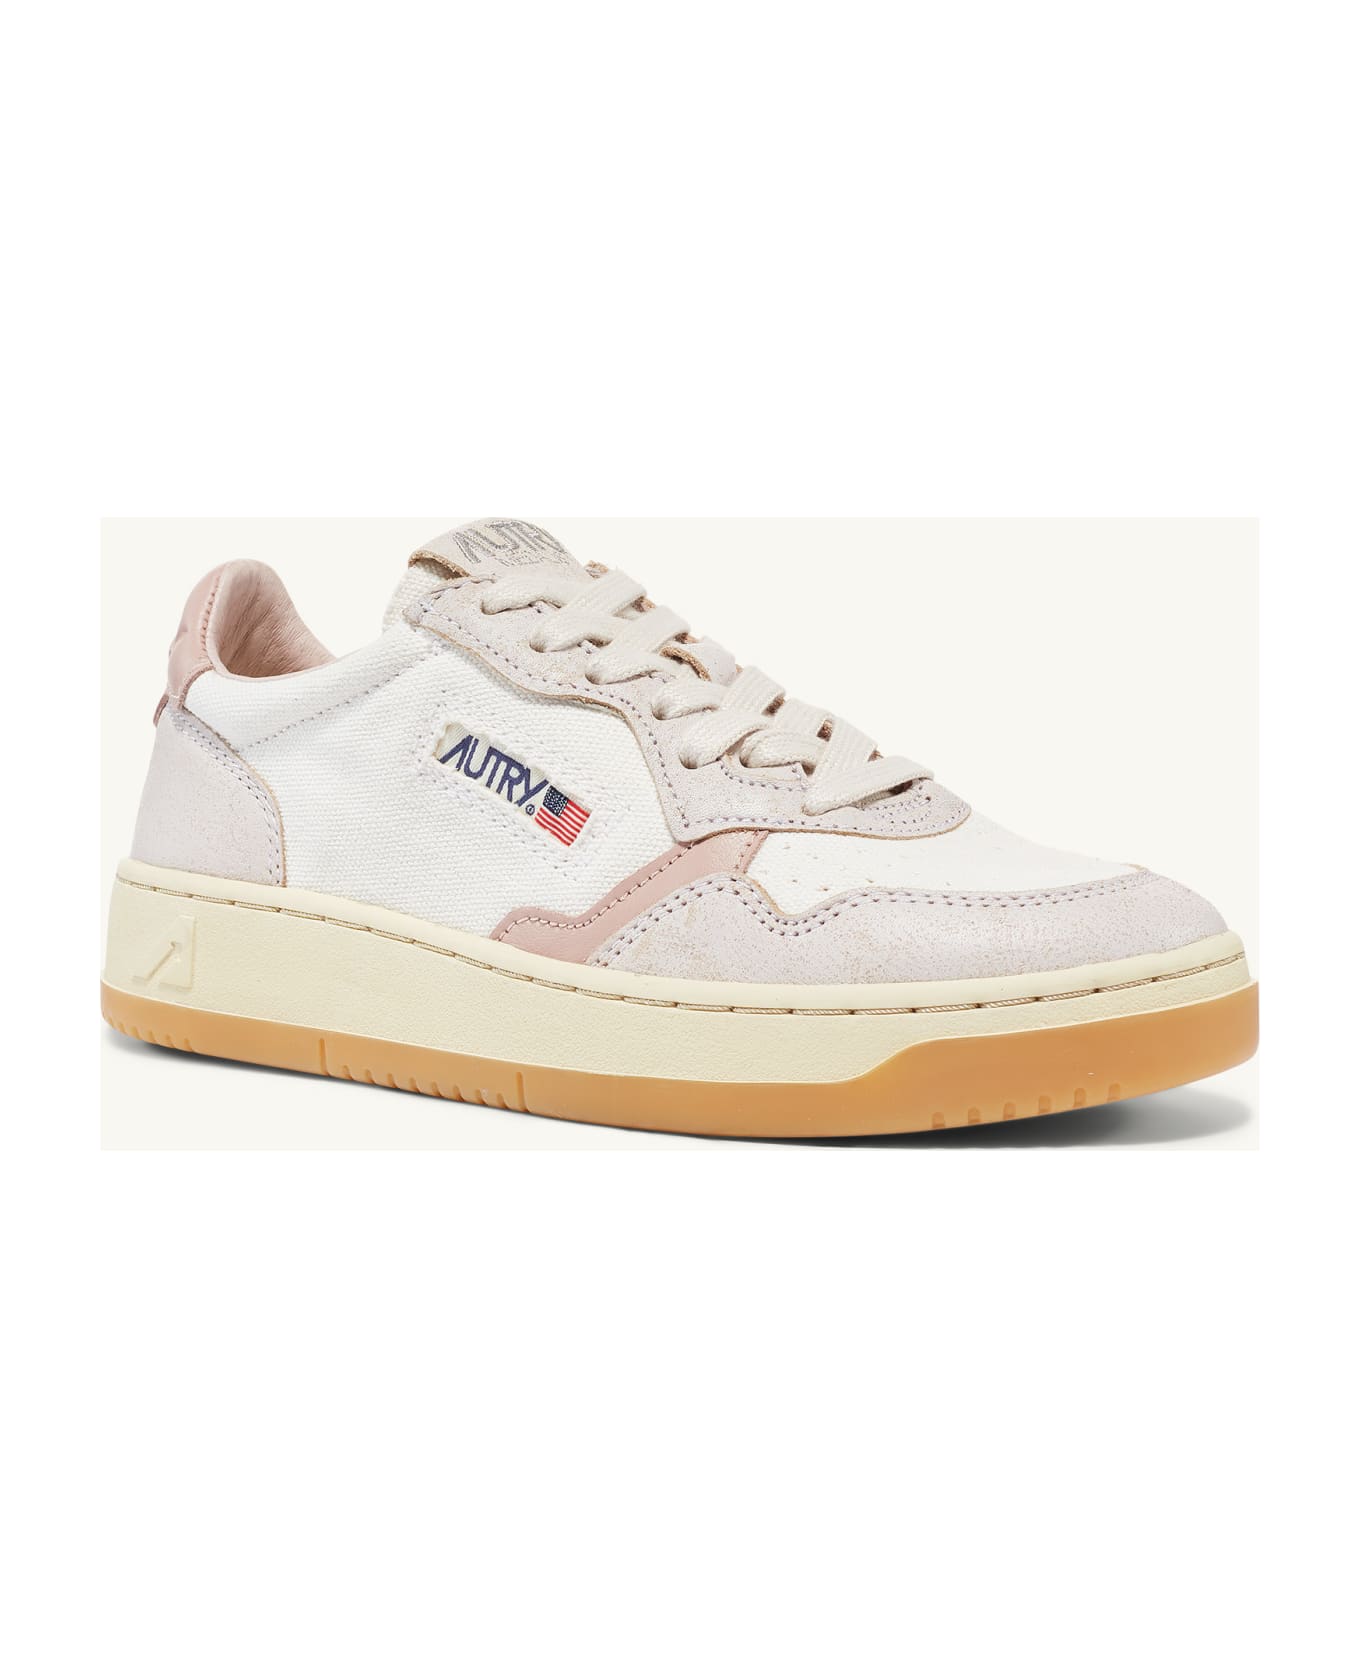 Autry Medalist Low Man Sneakers - White Pow スニーカー